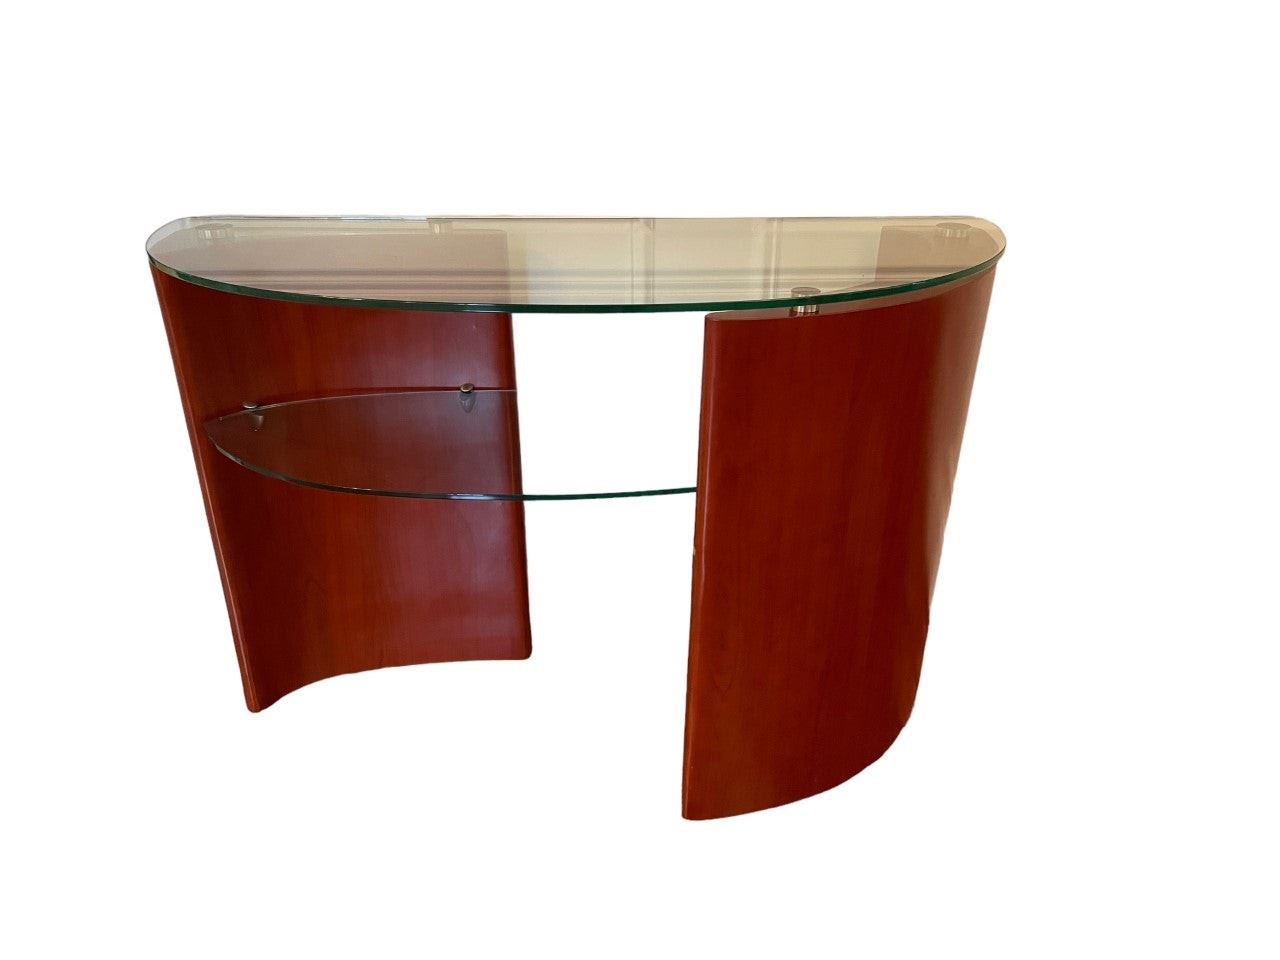 $400 USD     Vladimir Kagan Style Mid Century Wood/Glass Wave Console Table SB183-6      Description: Sinuous curves define this sculptural table.  Perfect for setting drinks, a favorite magazine, or an eye-catching floral display, this console table is a must-have. Its demilune glass top and lower-tier offer a spot to set decor, books or magazines.
Dimensions: 45 x 18 x 29.25"H
Condition: Very good condition
Local pick up Chevy Chase, MD.  Located on first floor.  Contact us for shipper suggestions.      https://goodbyhello.com/products/mid-century-wood-glass-wave-console-entry-table-sb183-6?_pos=40&_sid=32be479f3&_ss=r